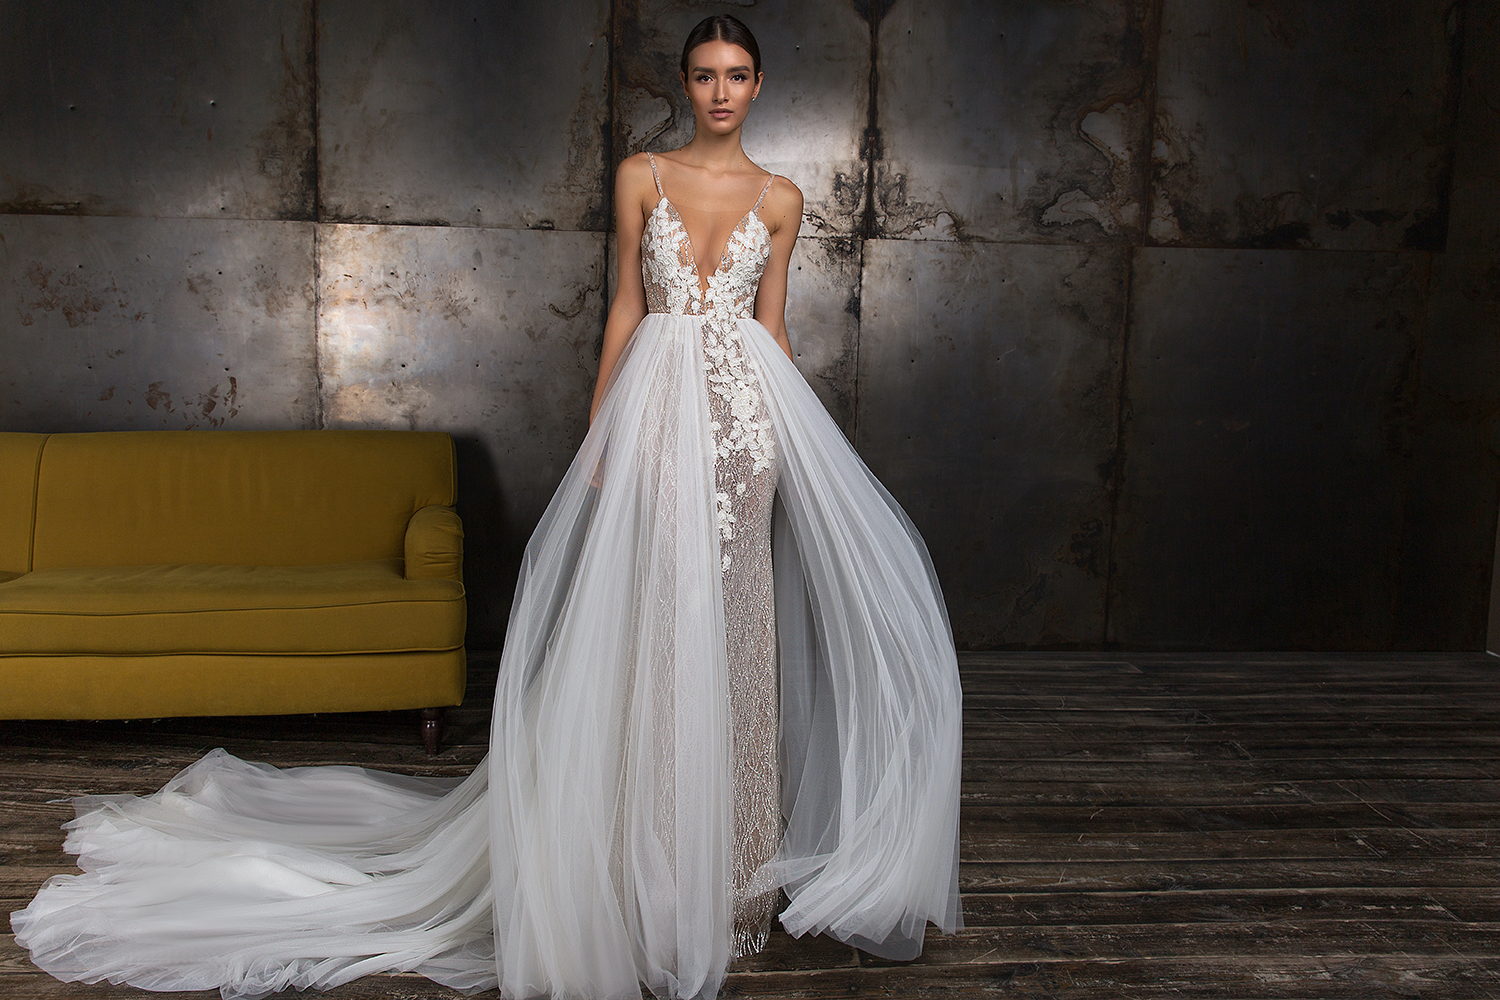 Wedding Dress Shopping: What to Do and When